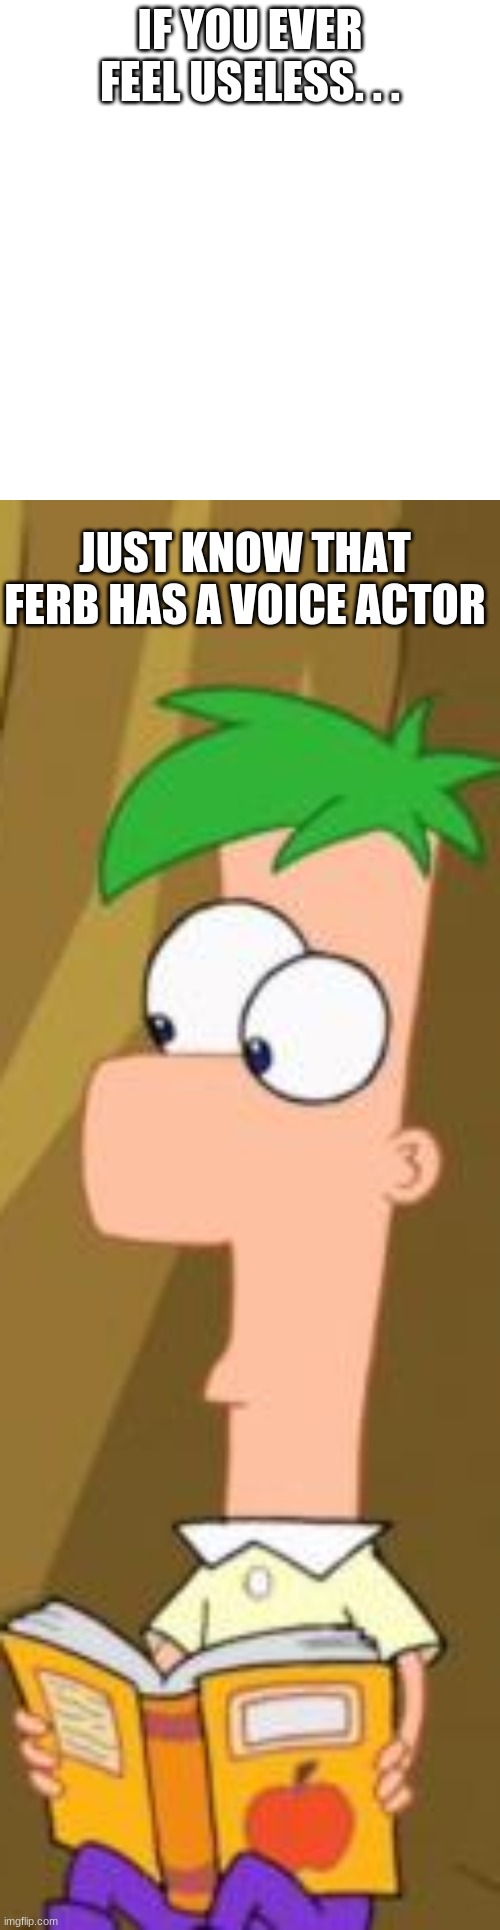 . . . | IF YOU EVER FEEL USELESS. . . JUST KNOW THAT FERB HAS A VOICE ACTOR | image tagged in memes,blank transparent square,phineas ferb | made w/ Imgflip meme maker